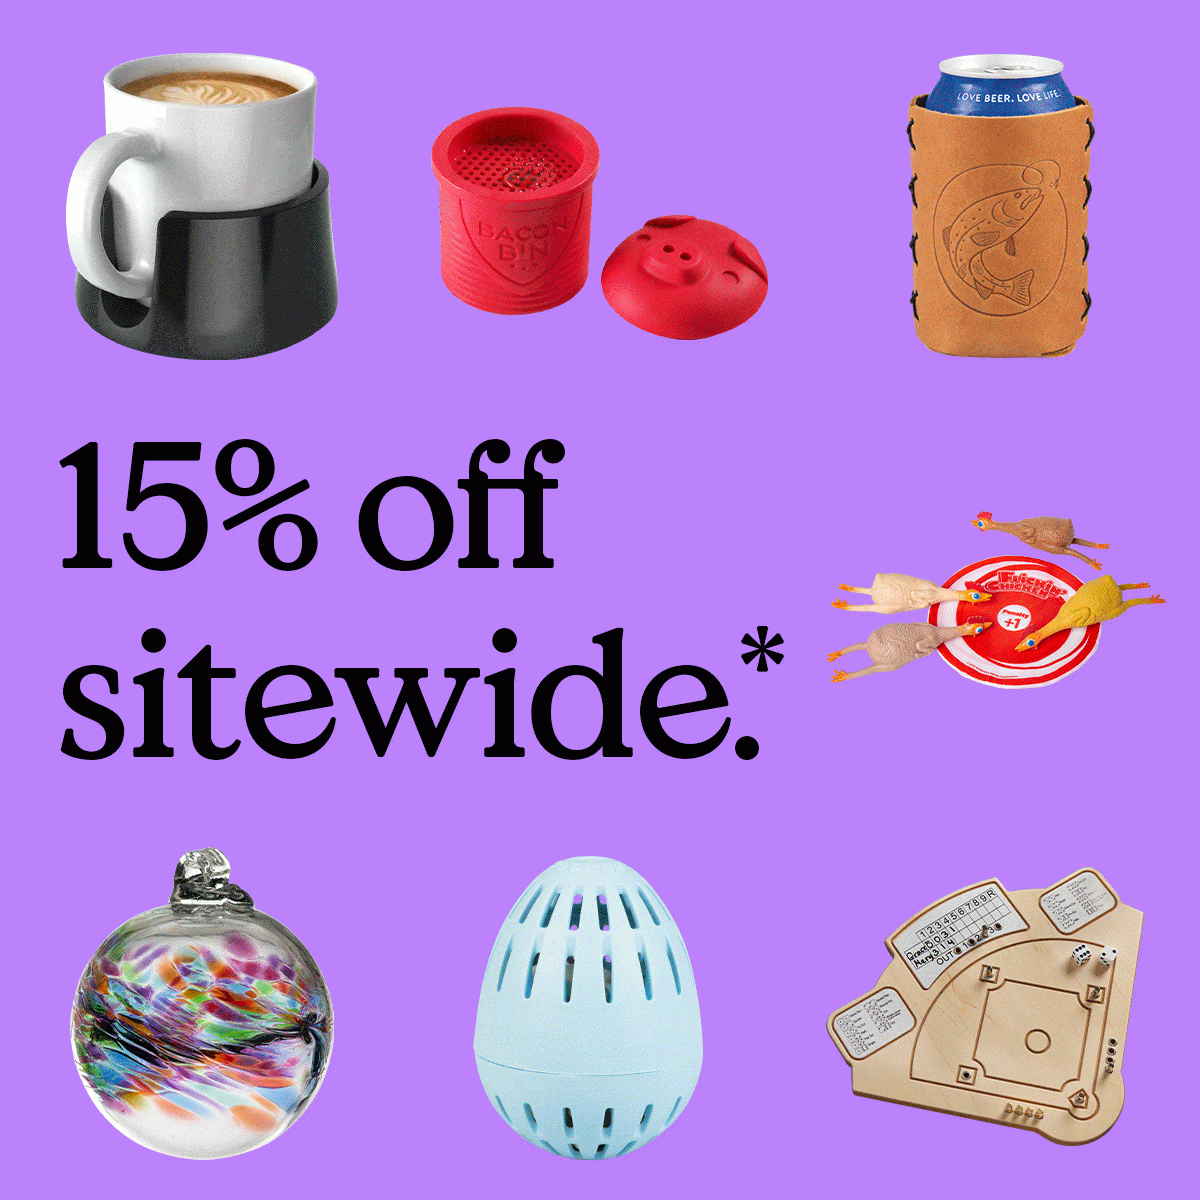 15% off sitewide.